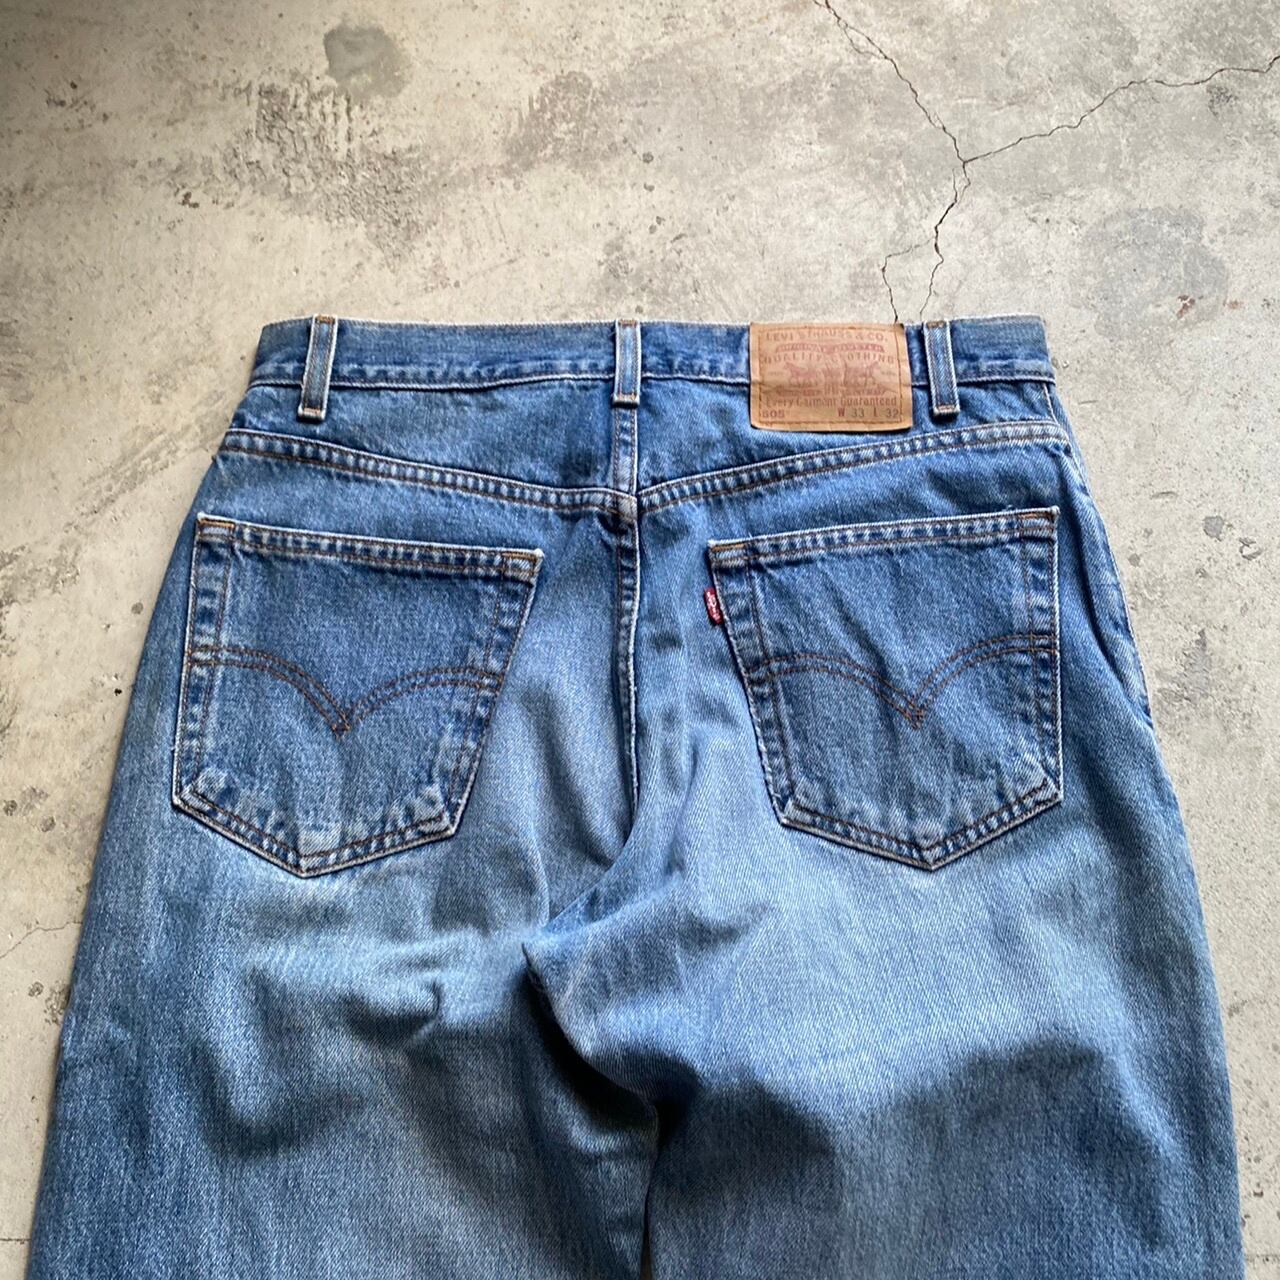 USED 古着Levi's 90s リーバイス505 メキシコ製　ヴィンテージ | magazines webshop powered by BASE